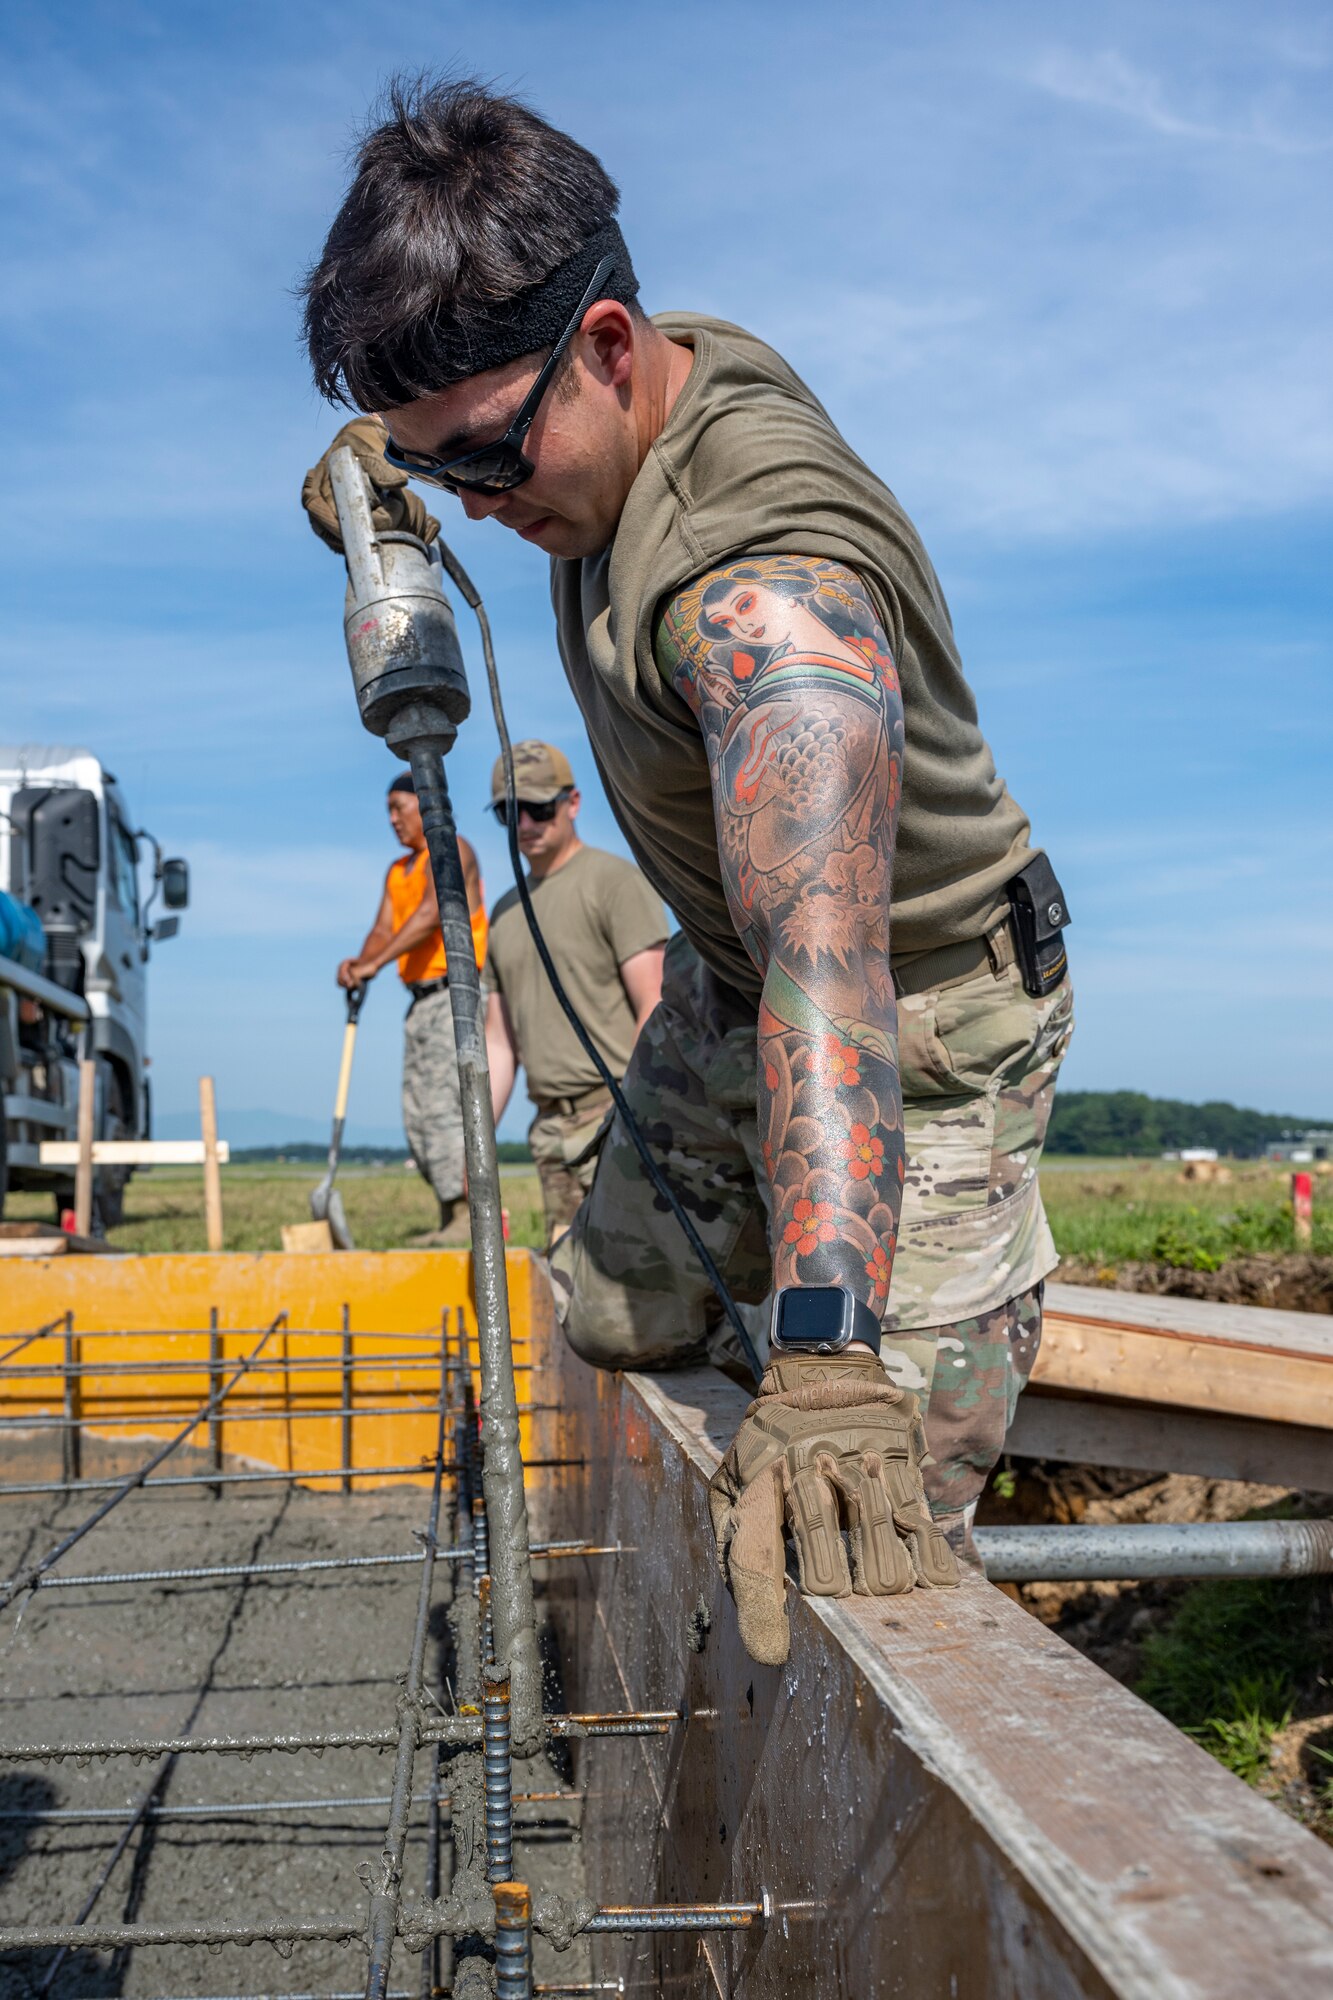 An Airman working with wet cement.